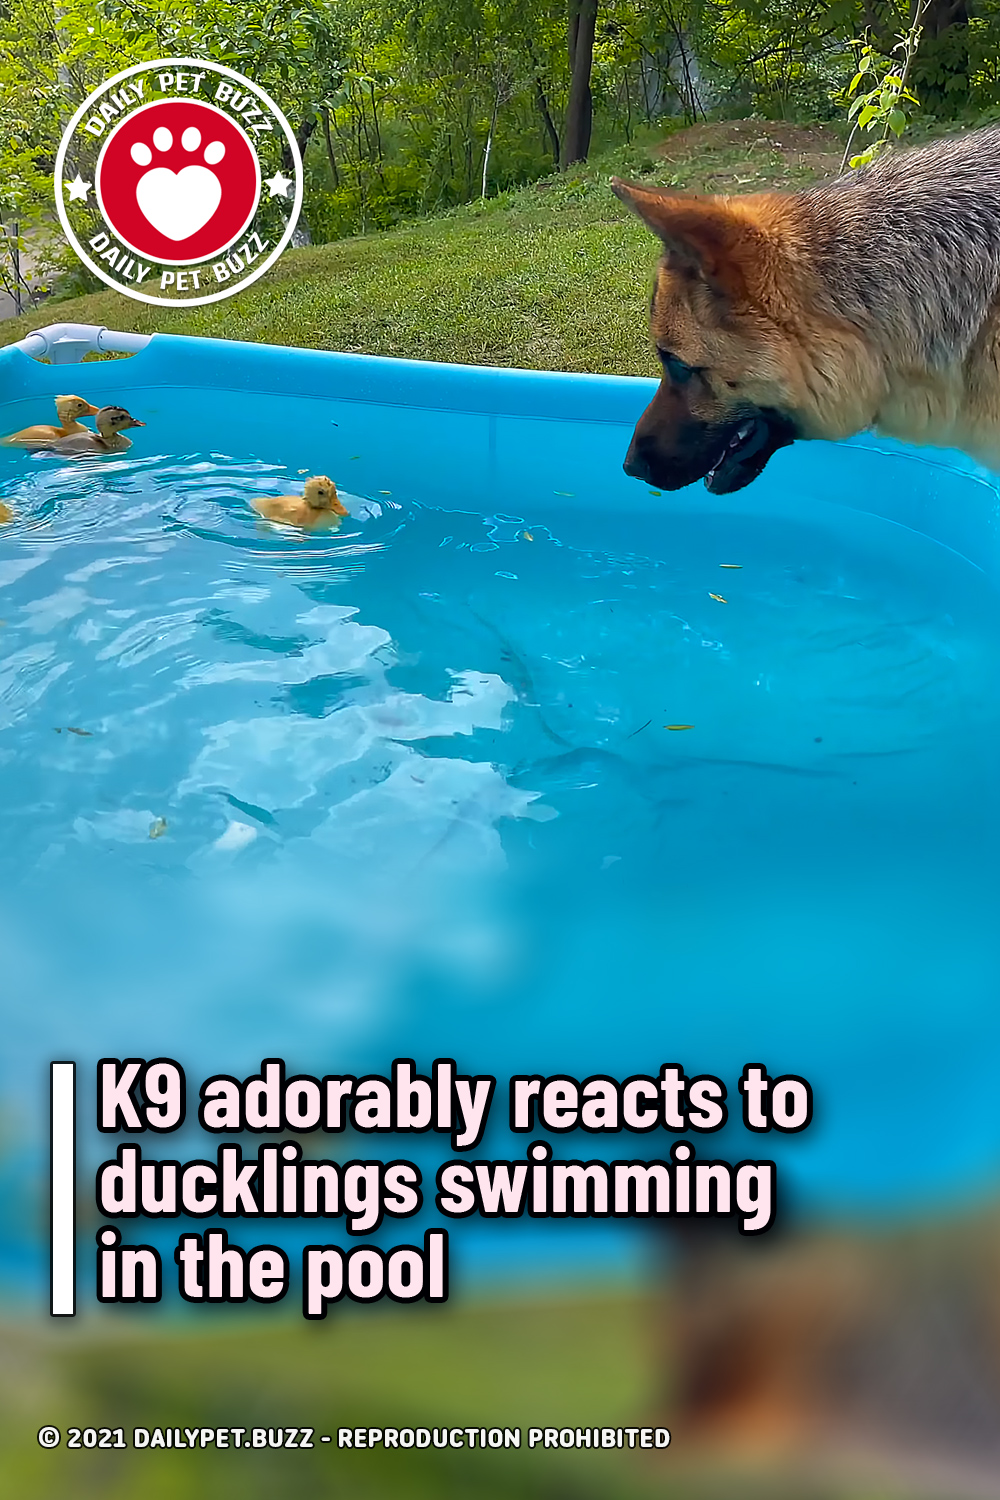 K9 adorably reacts to ducklings swimming in the pool